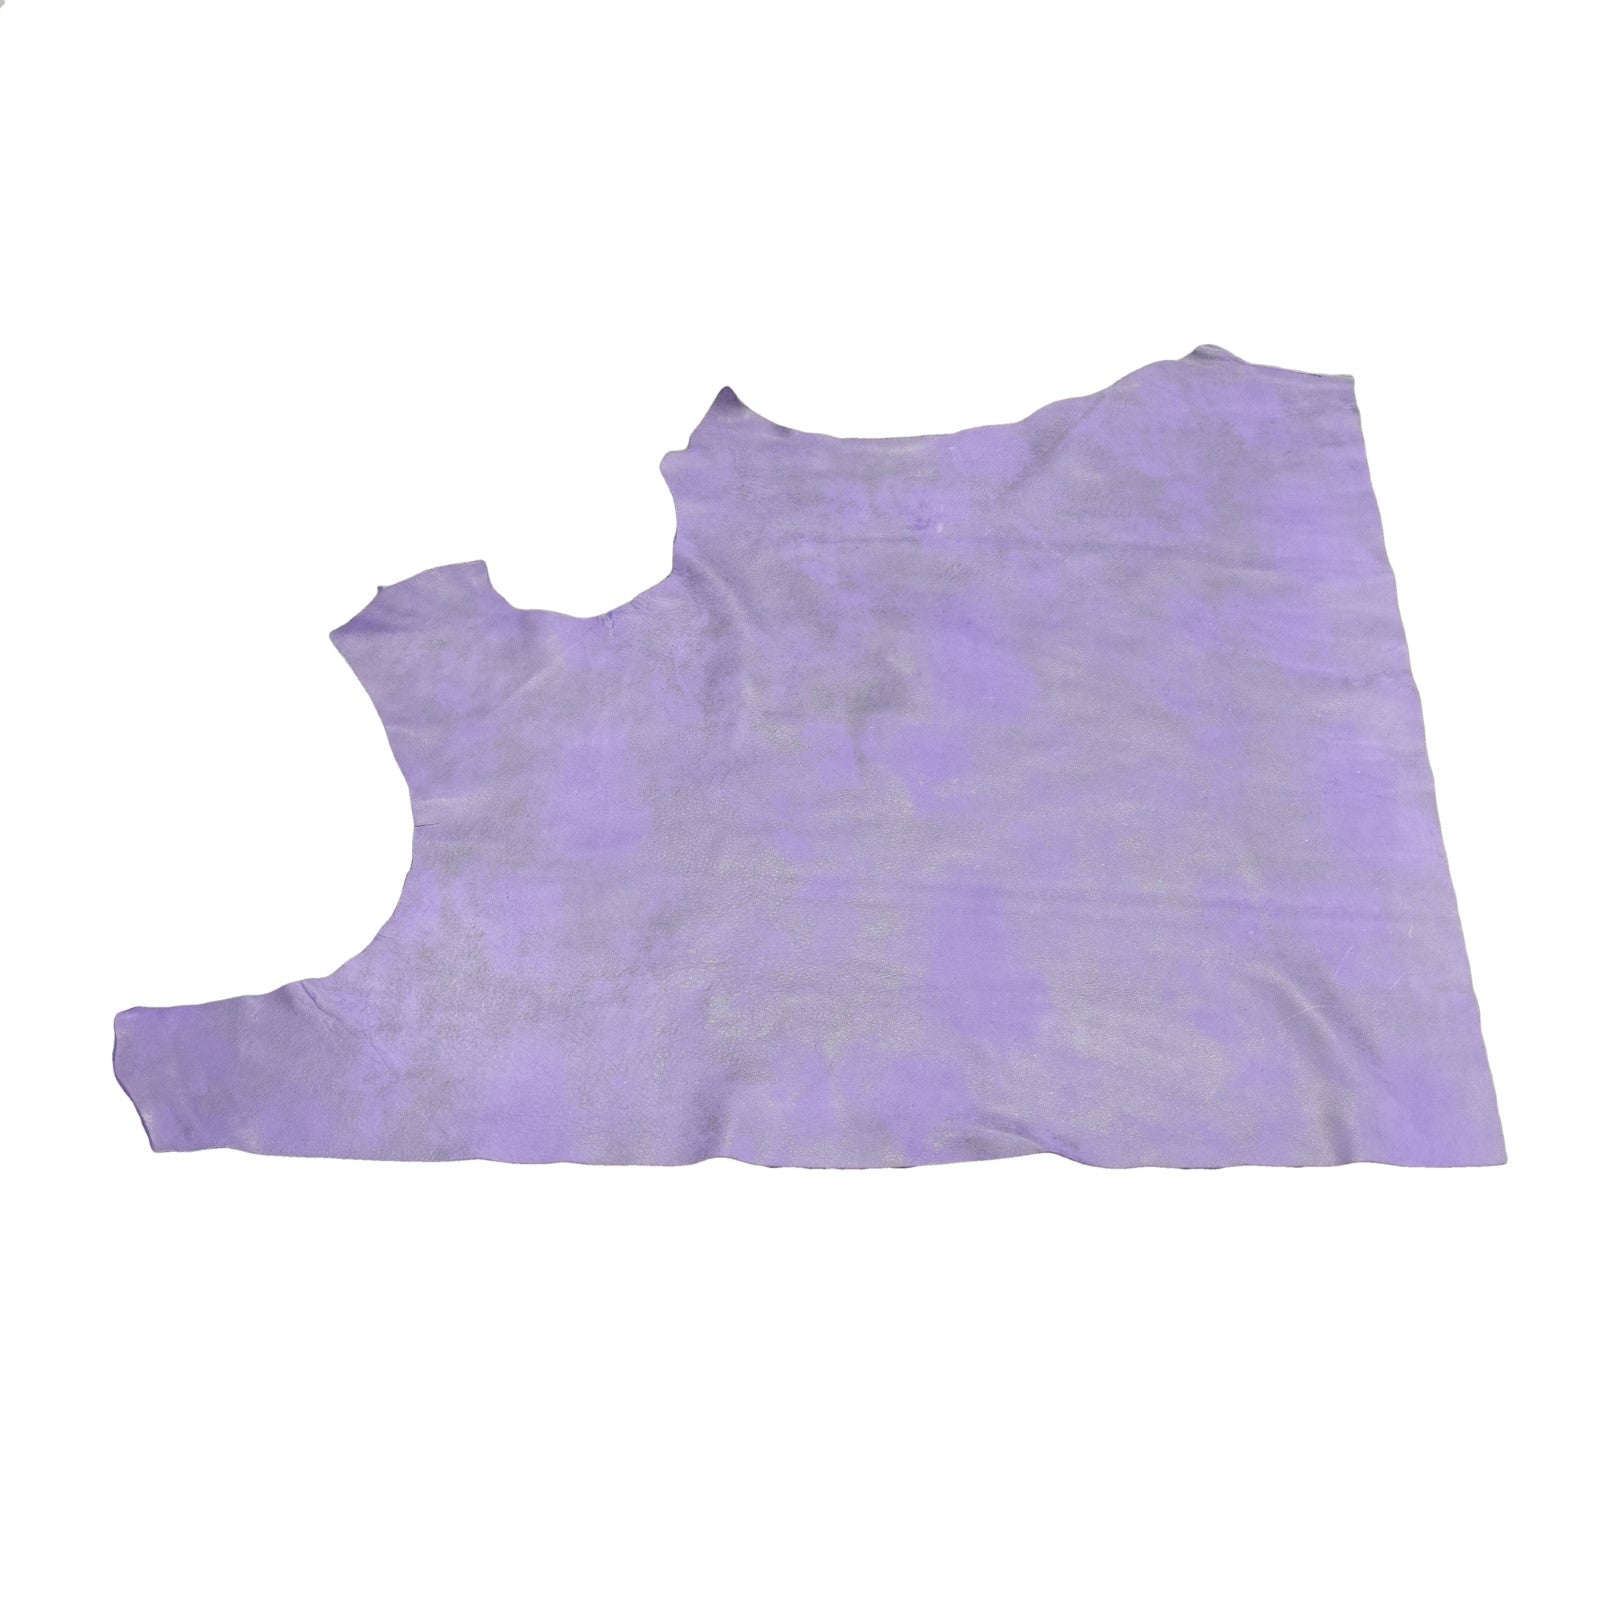 Dearly Beloved Purple Rock N Roll 2-3 oz Leather Cow Hides, Top Piece / 6.5-7.5 Square Foot | The Leather Guy